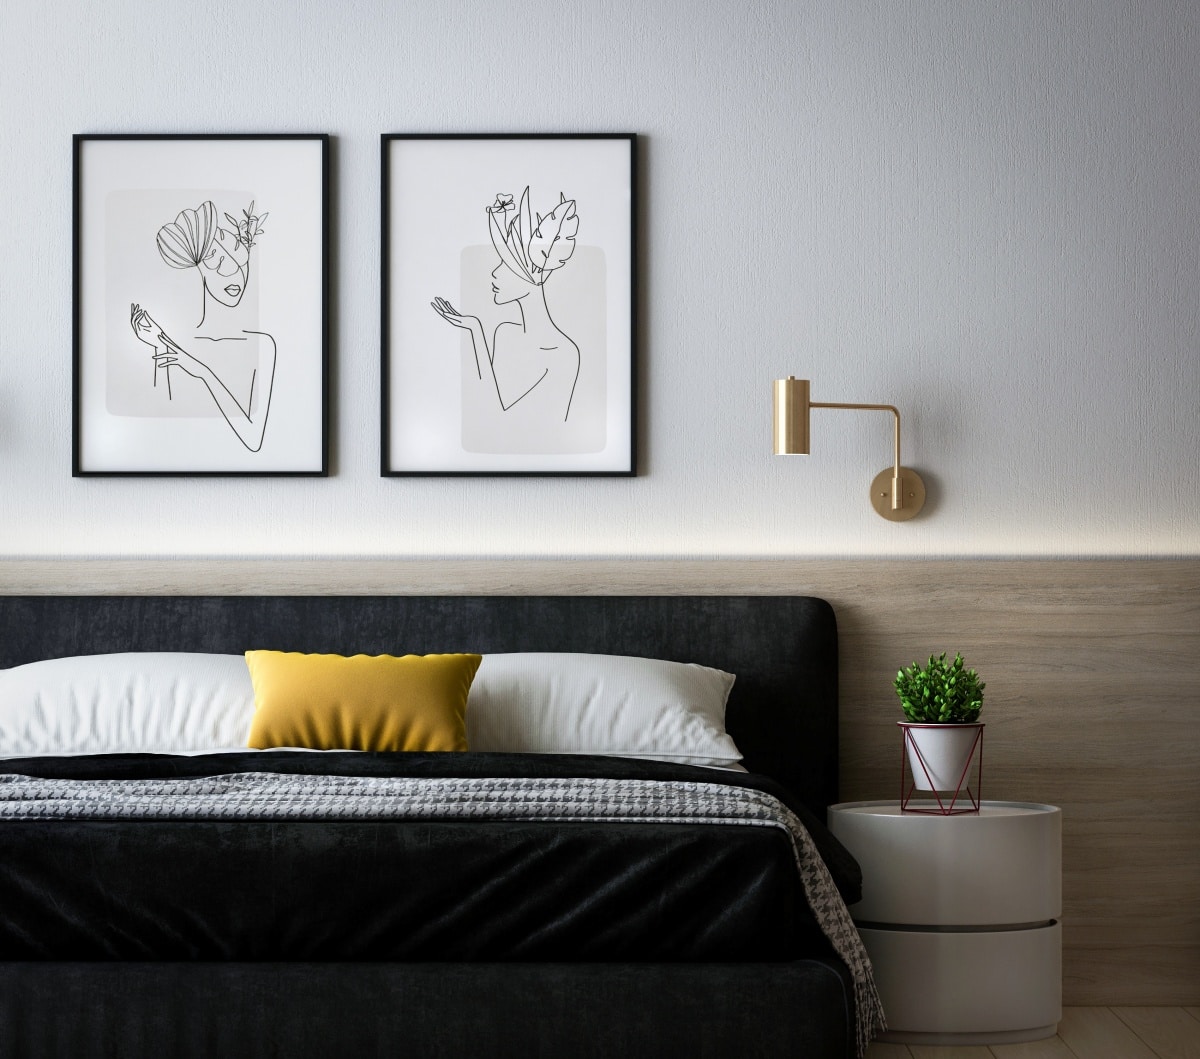 Black, white, and yellow bedroom with line art on wall